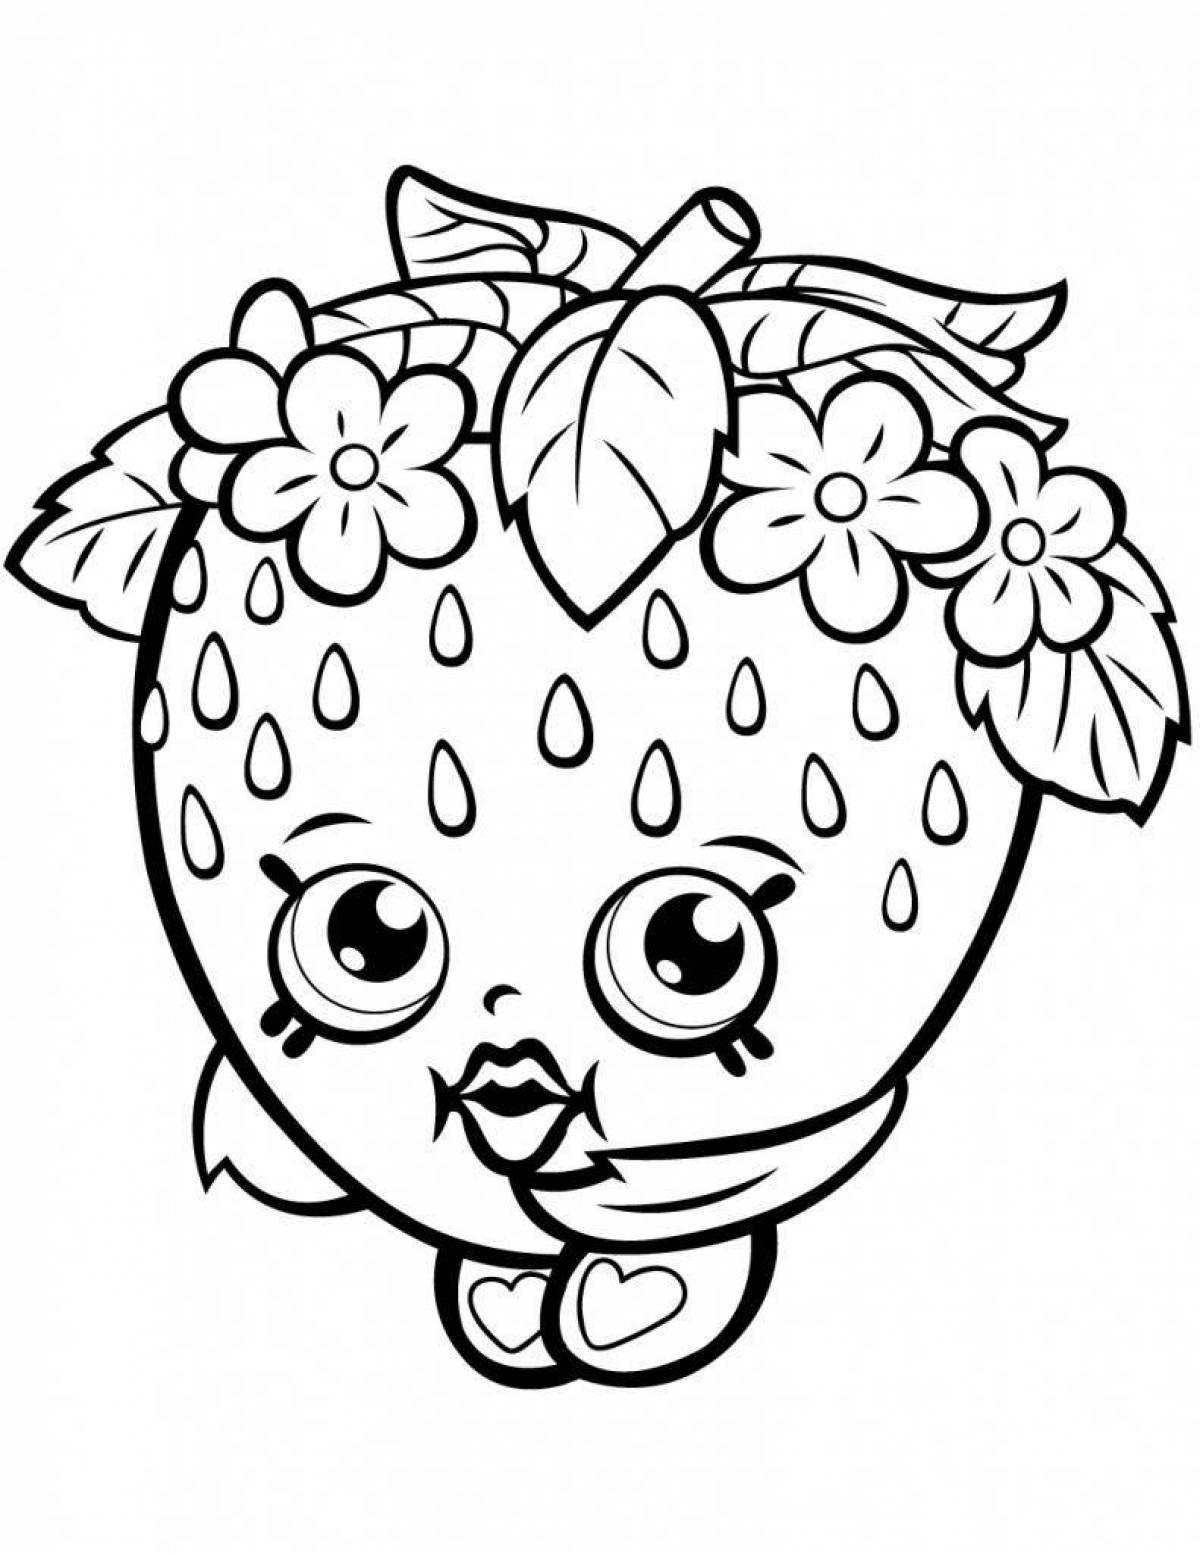 Joyful Shopkins coloring pages for girls